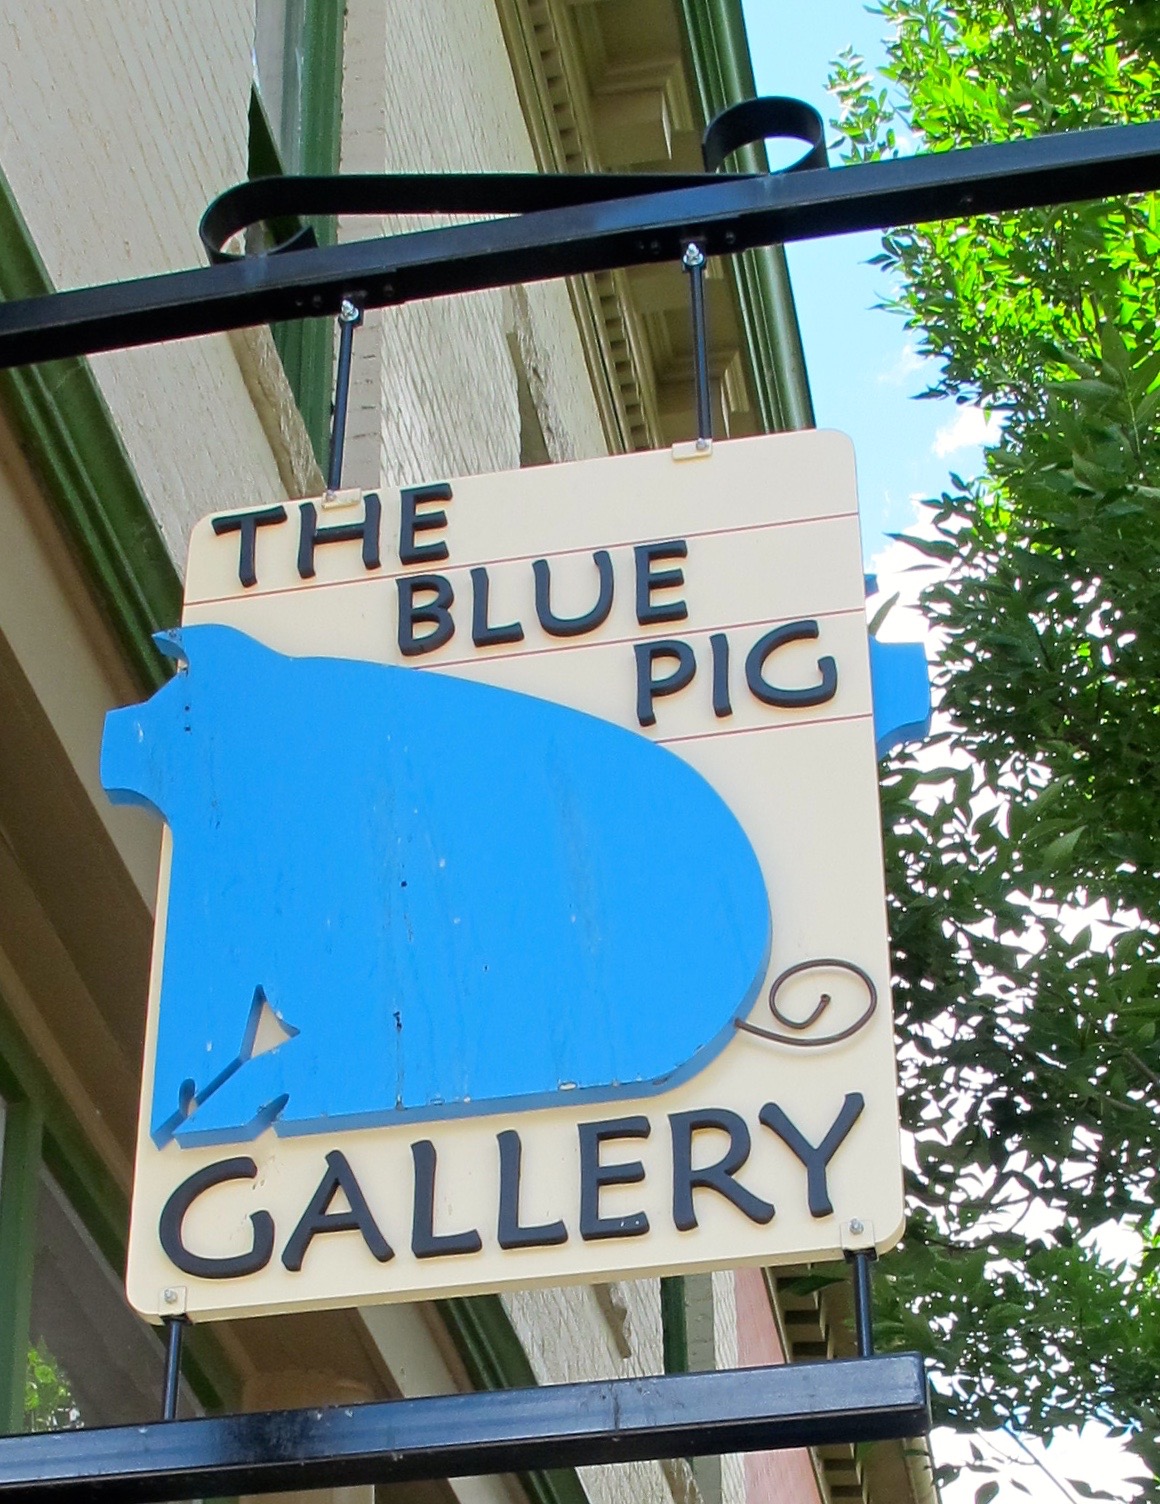 The Blue Pig offers an eclectic collection of art, ceramics and jewelry. Photo by Marla Norman.